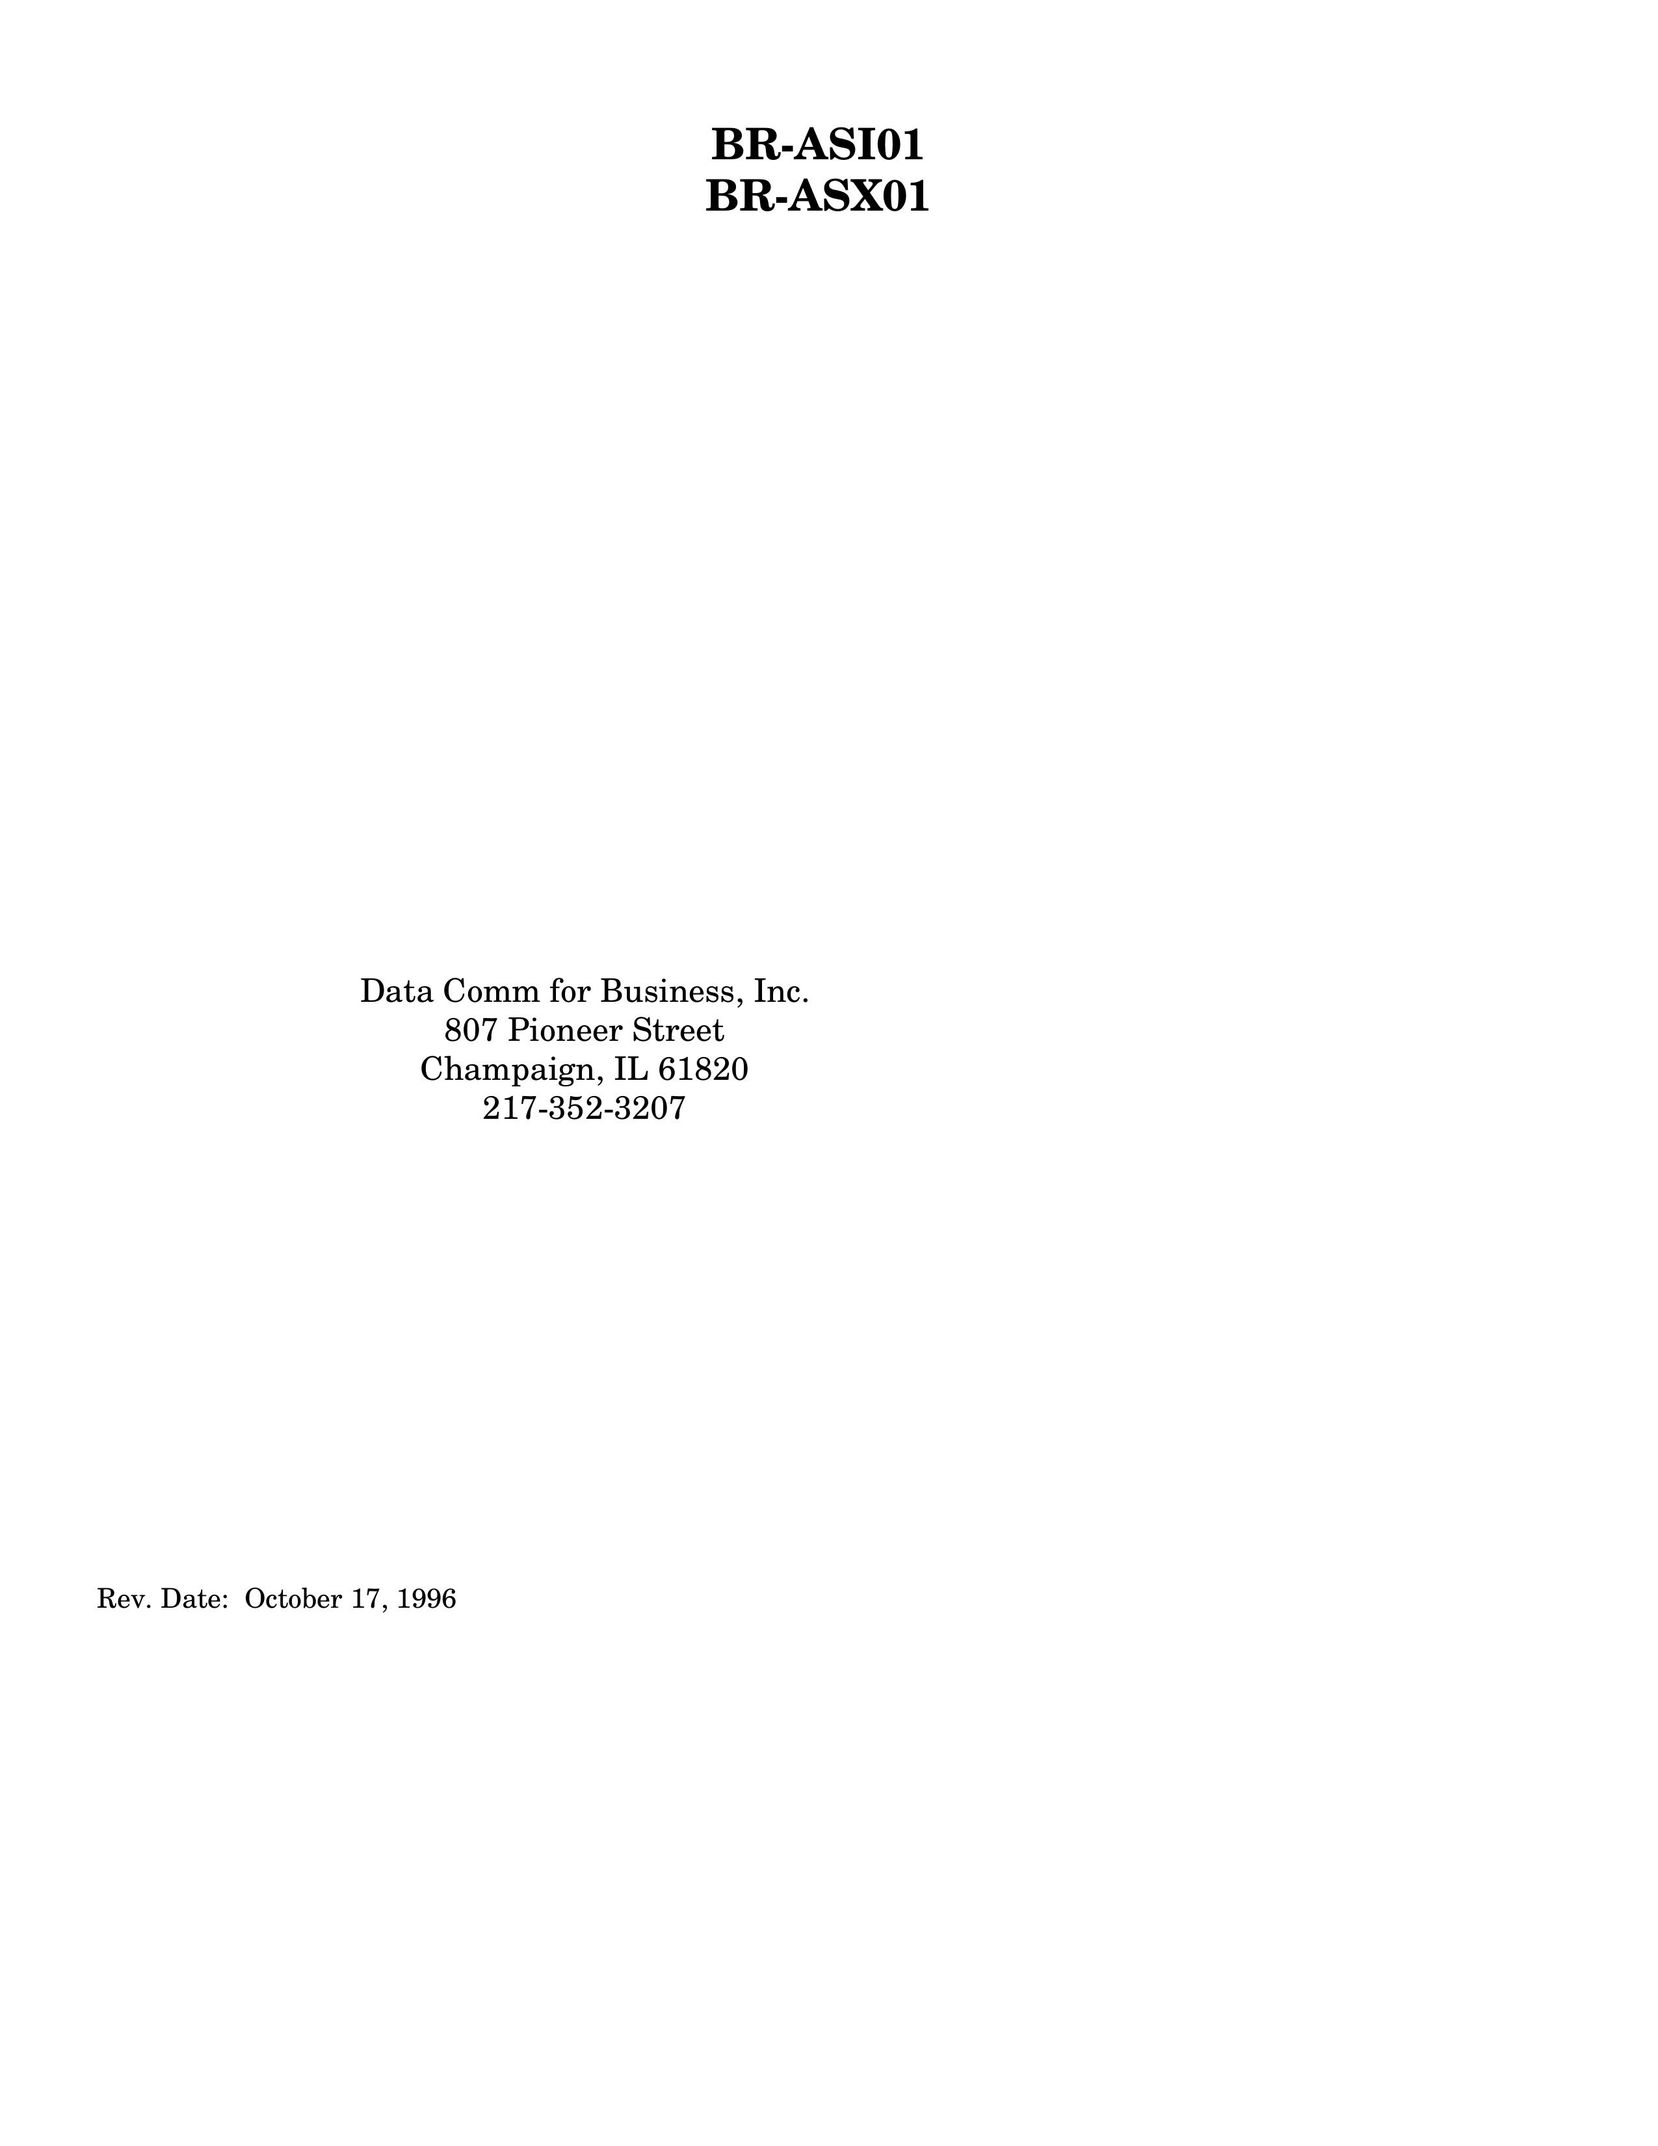 RAD Data comm BR-ASX01 Network Router User Manual